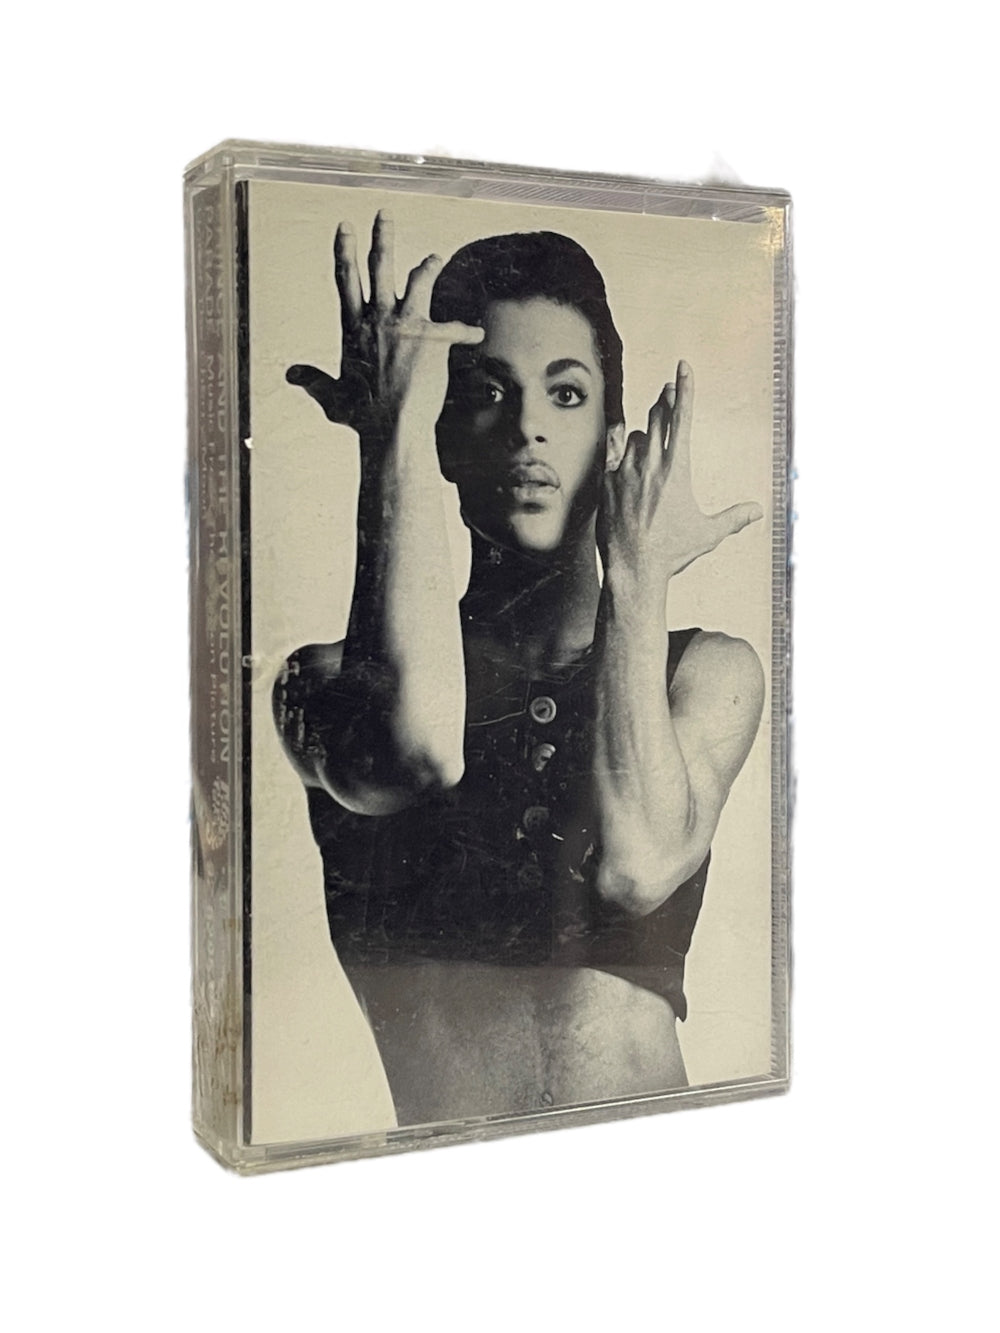 Prince – & The Revolution - Parade Music From The Motion Picture Under The Cherry Moon Cassette Album Canada Preloved: 1986